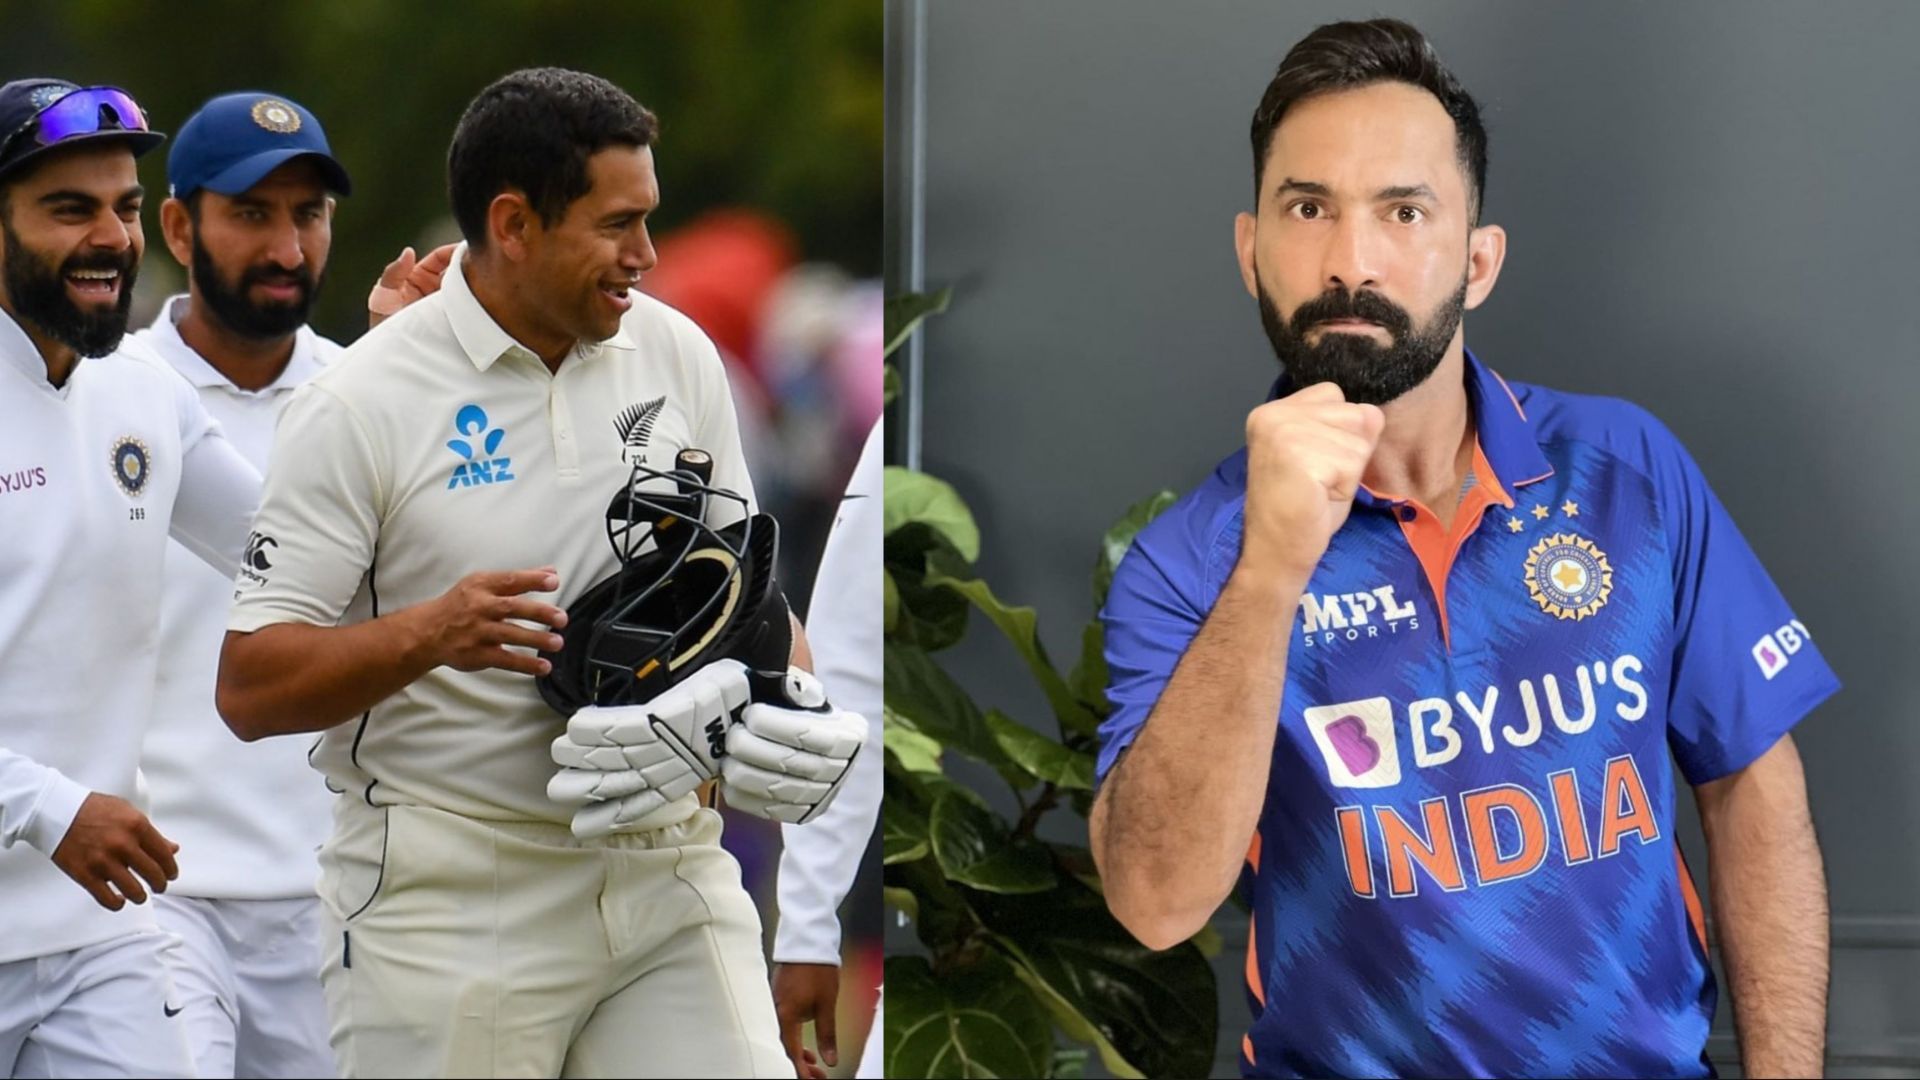 Ross Taylor has announced that he will retire in 2022; Dinesh Karthik (Image Source: Instagram)